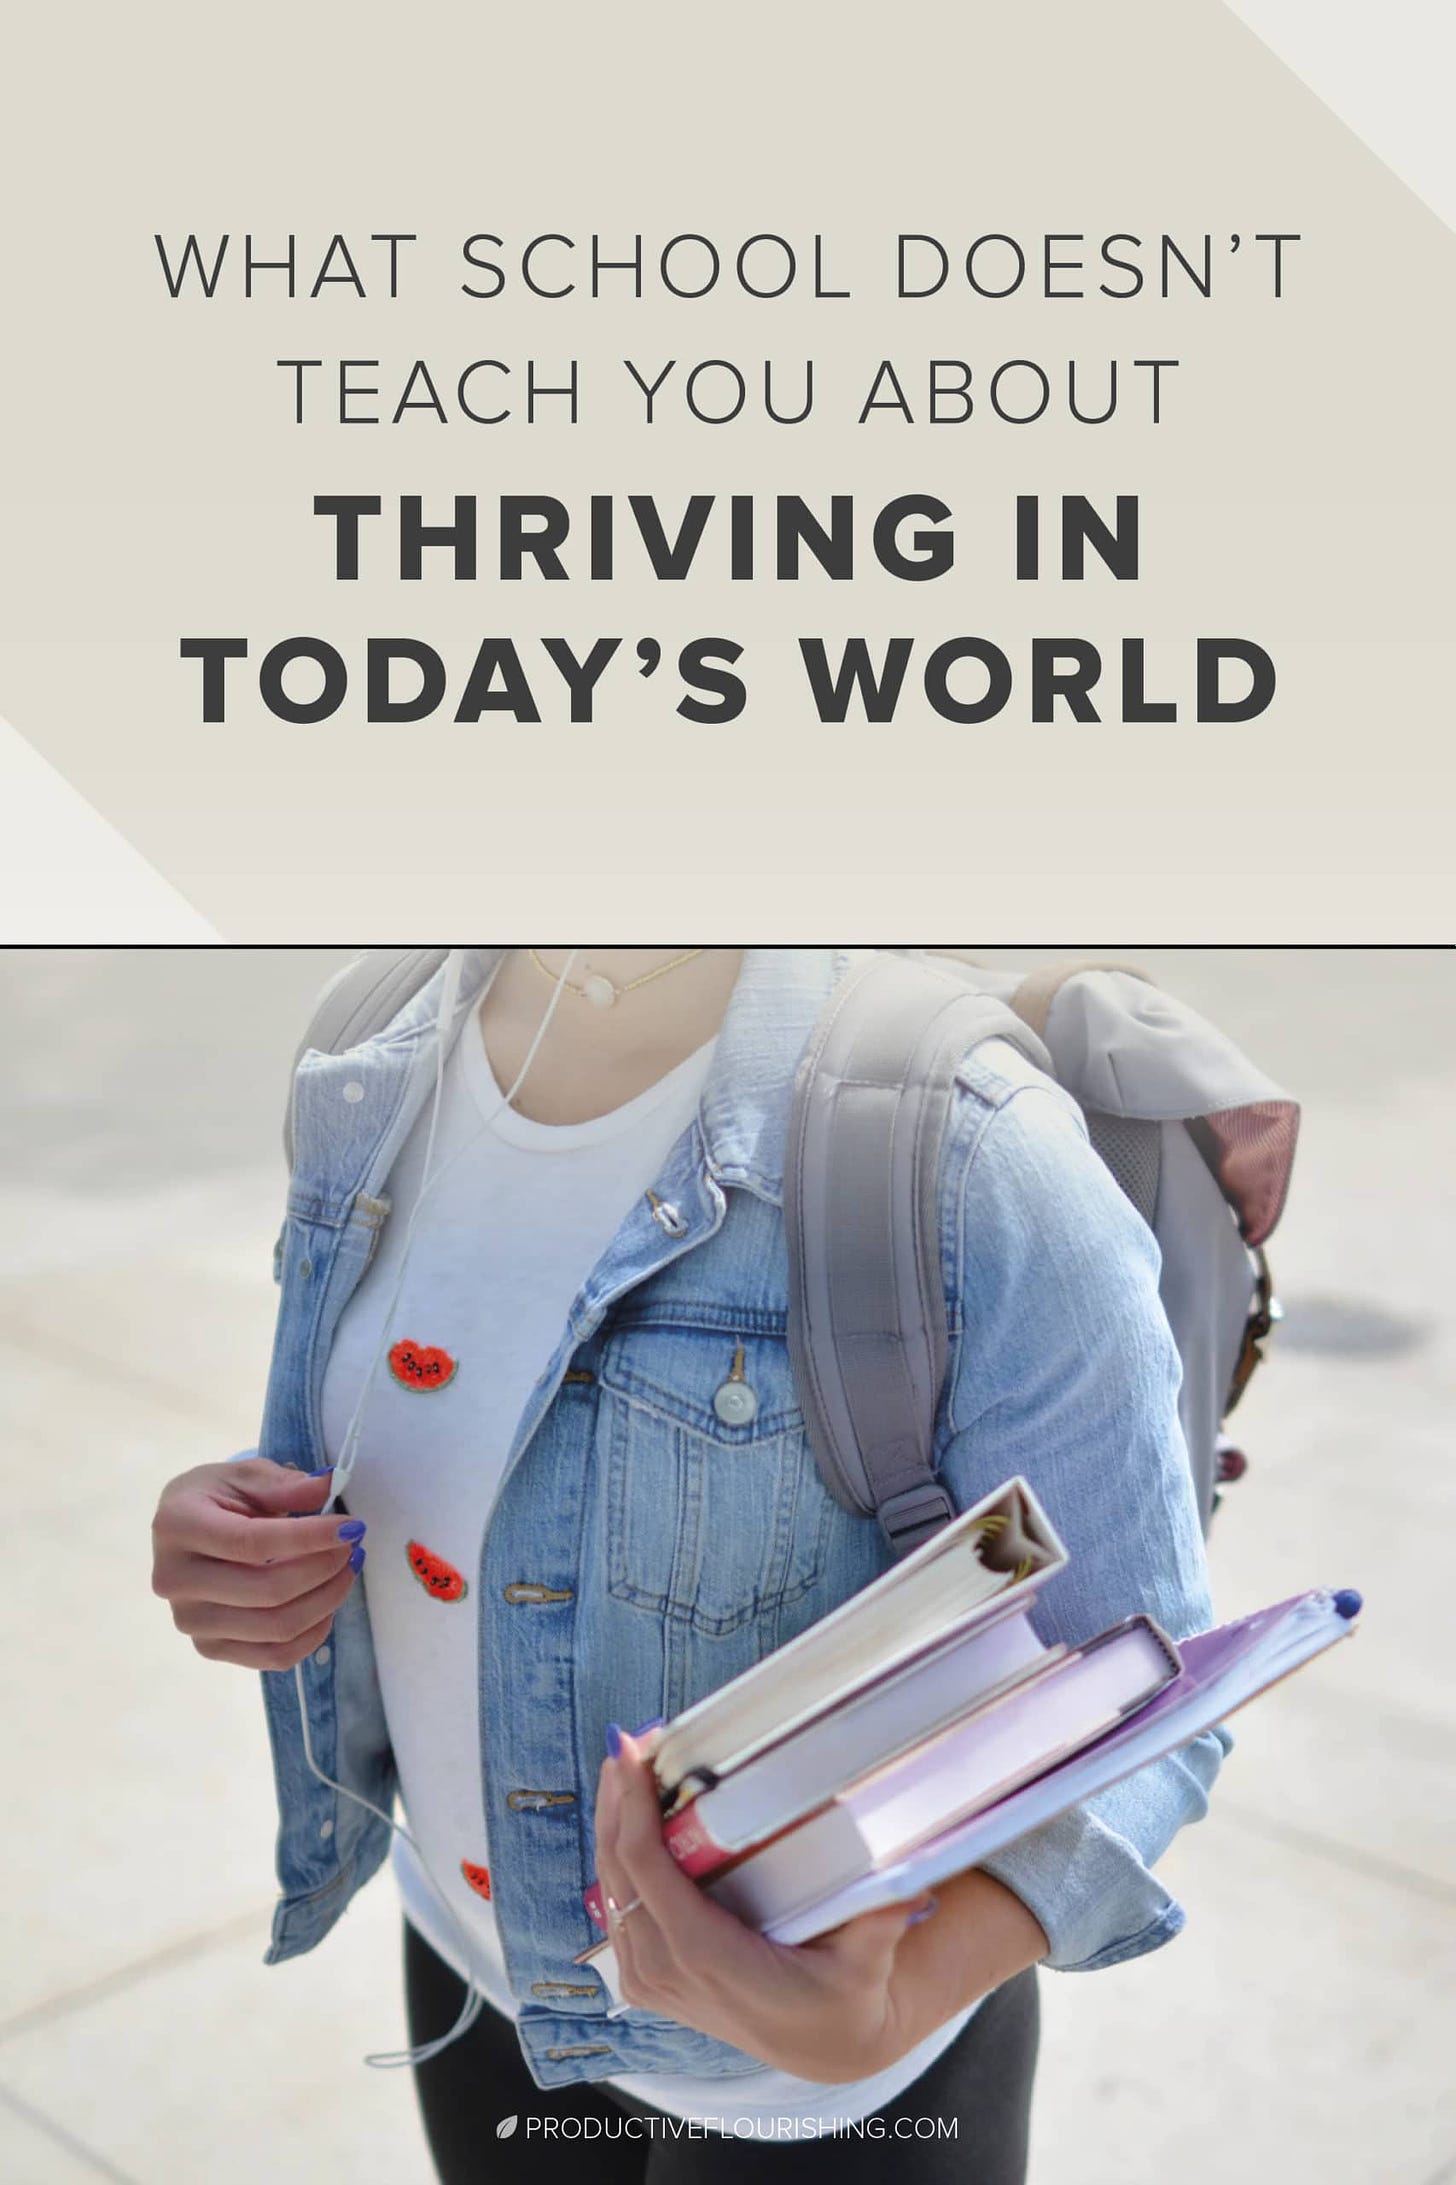 What School Doesn't Teach You About Thriving in Today's World. Click here to learn 5 ways school teaches us to be managed - not to manage ourselves. The big step is learning that what you know isn’t nearly as important as the work you finish in the world. #thrivingbusiness #schoolvswork #productiveflourishing